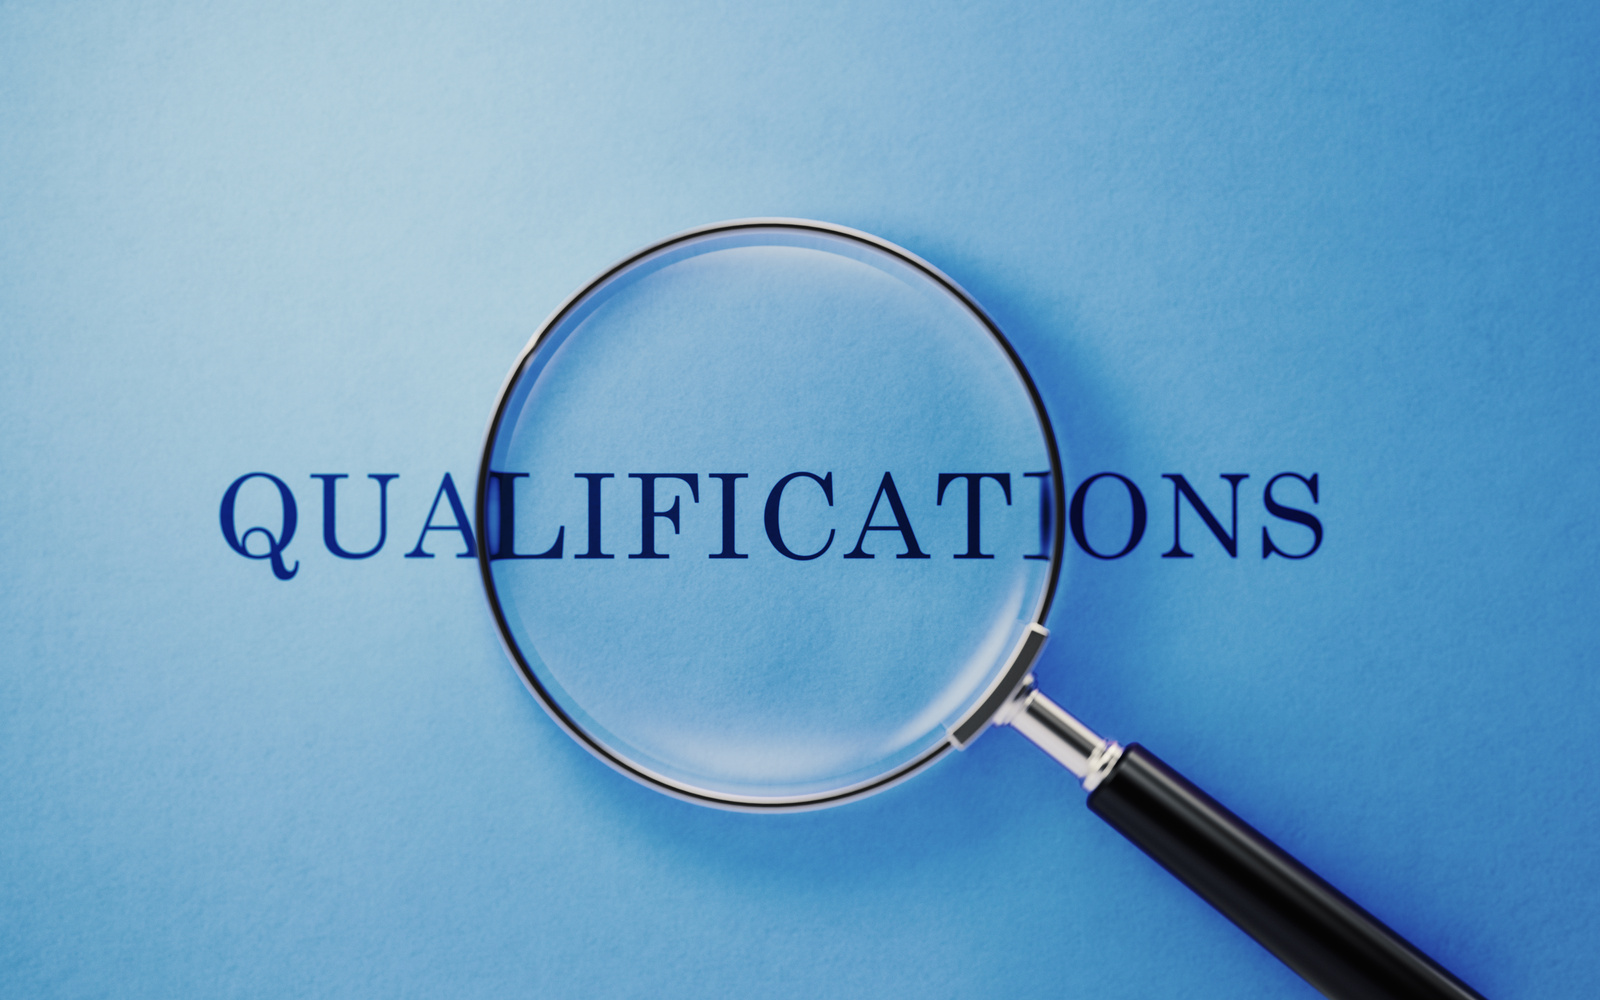 Magnifier And Qualifications Text On Blue Background